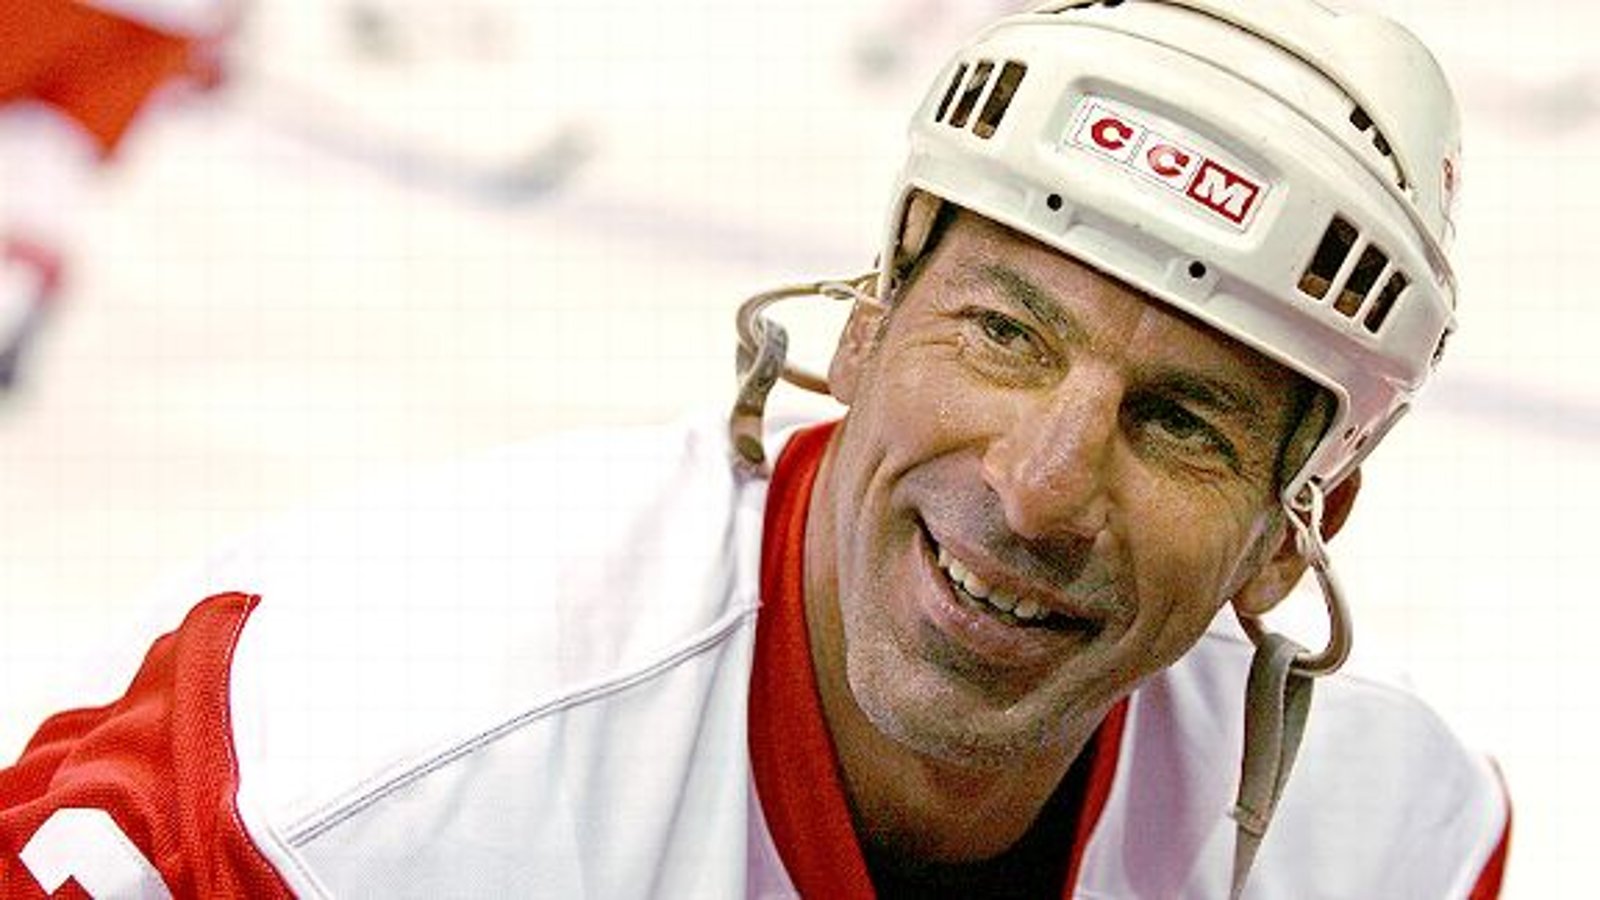 The insane story of a 48 year old Chelios’ night of partying before game day